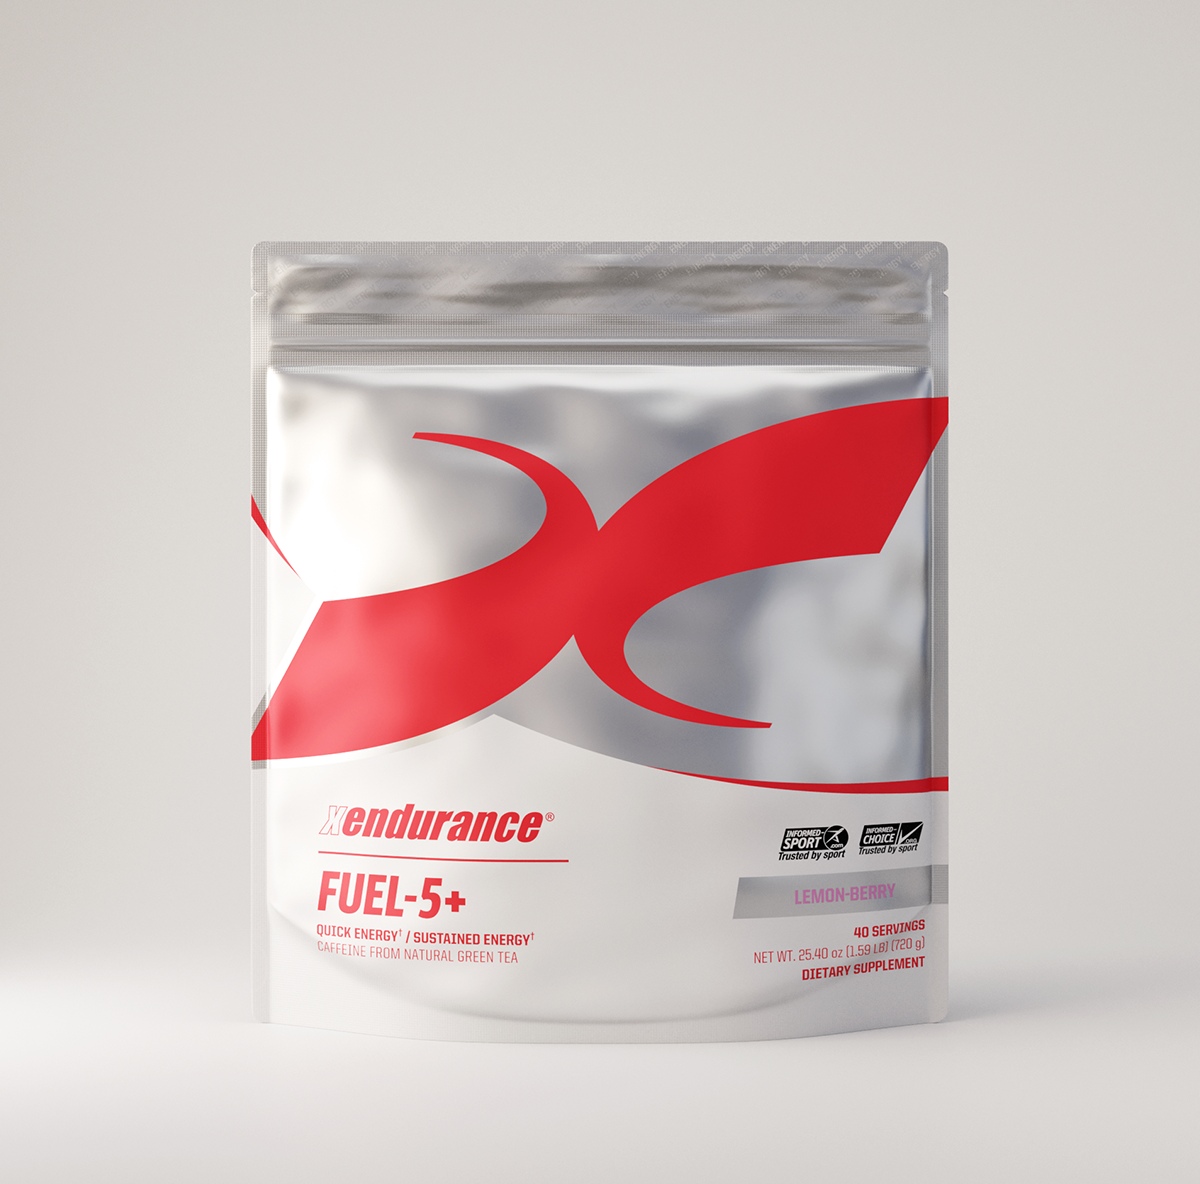 Xendurance  Daily Active Supplements & Skincare